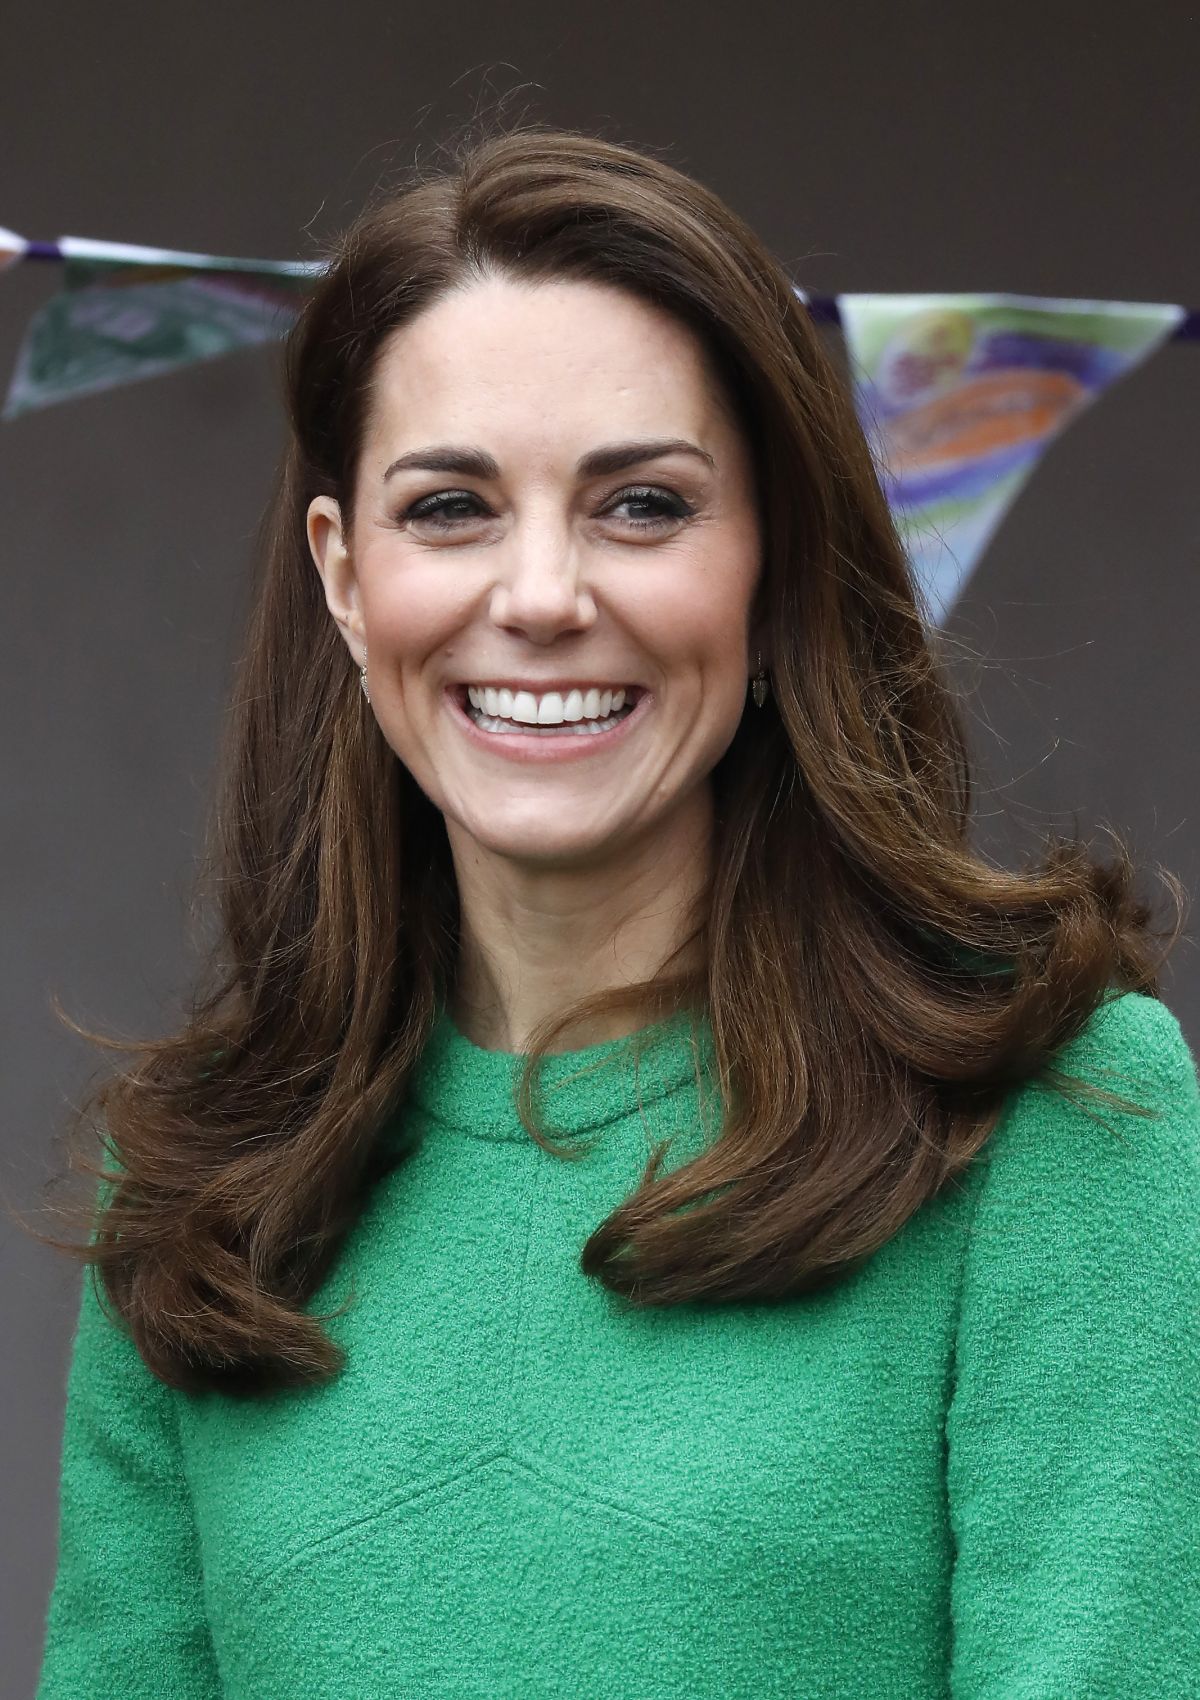 KATE MIDDLETON Visists a Schools in London 02/05/2019 – HawtCelebs